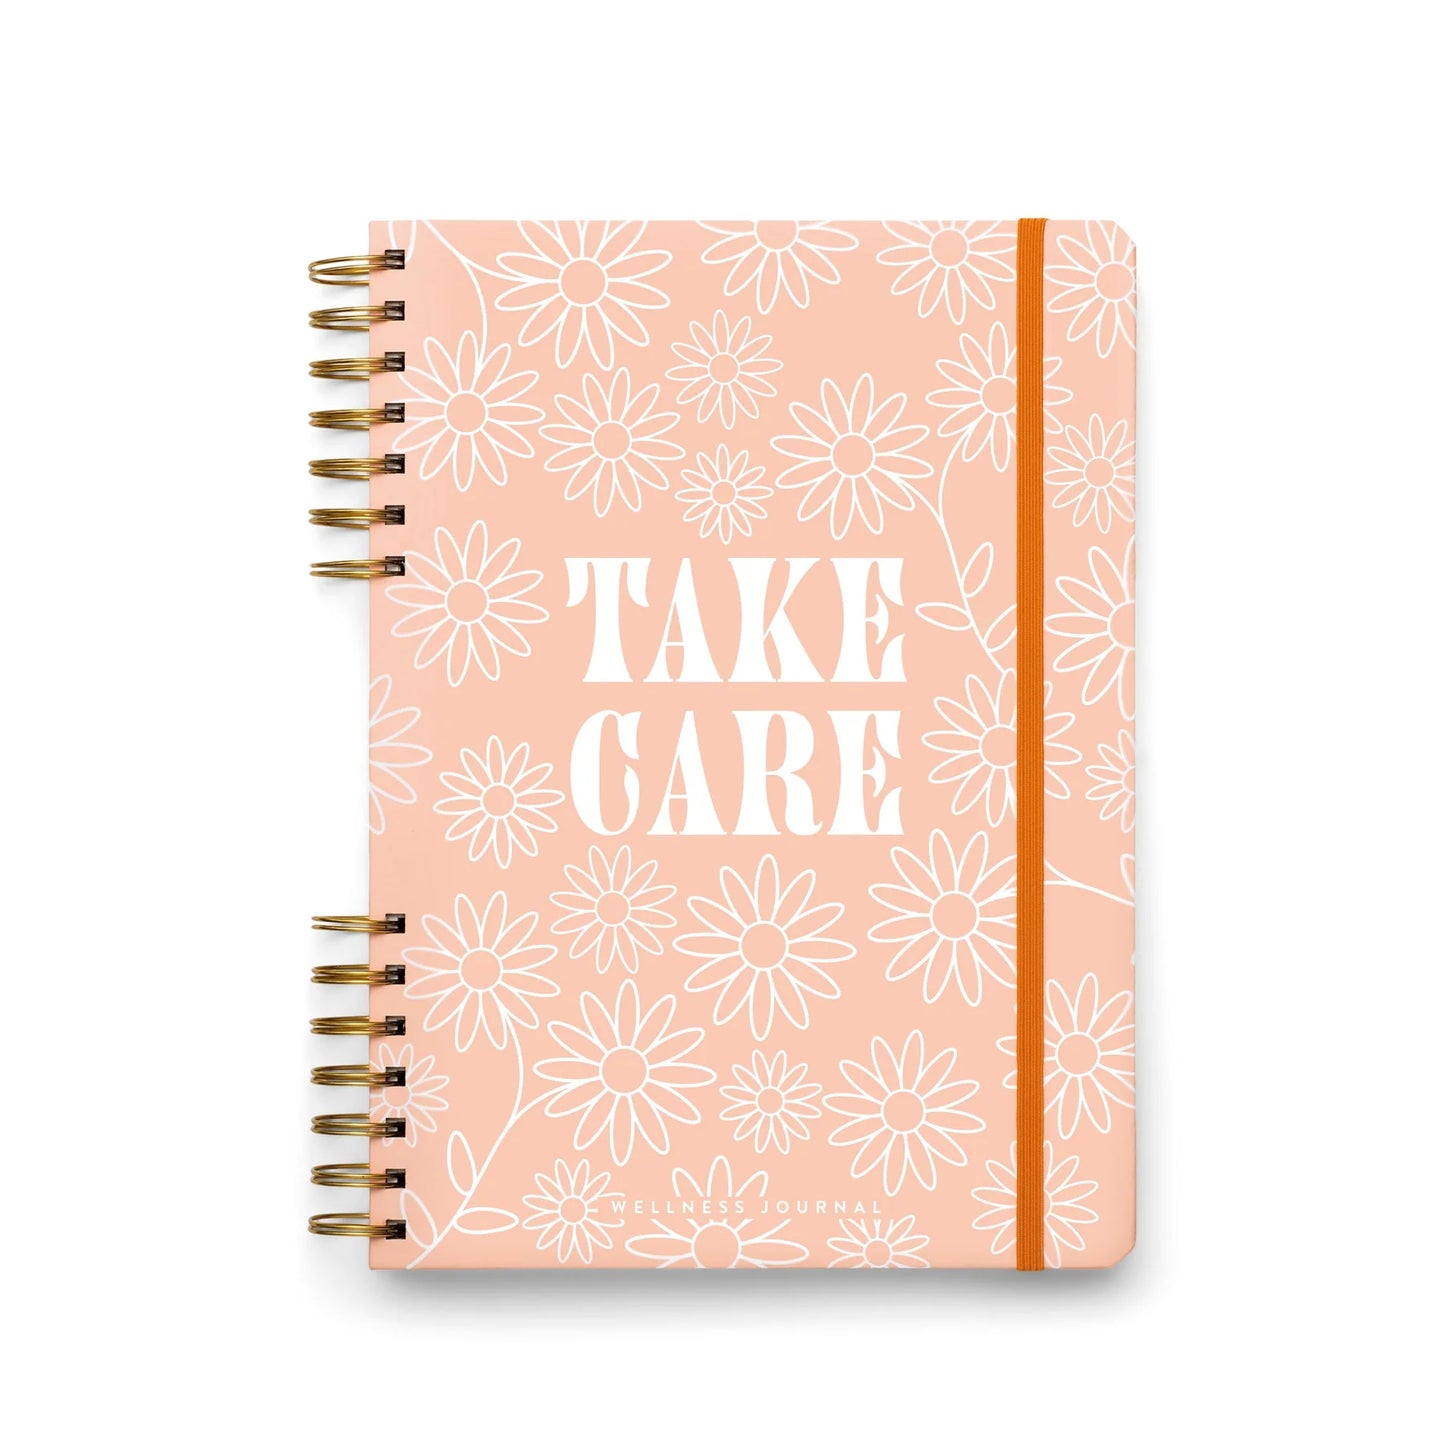 Guided Wellness Journal - "Take Care"